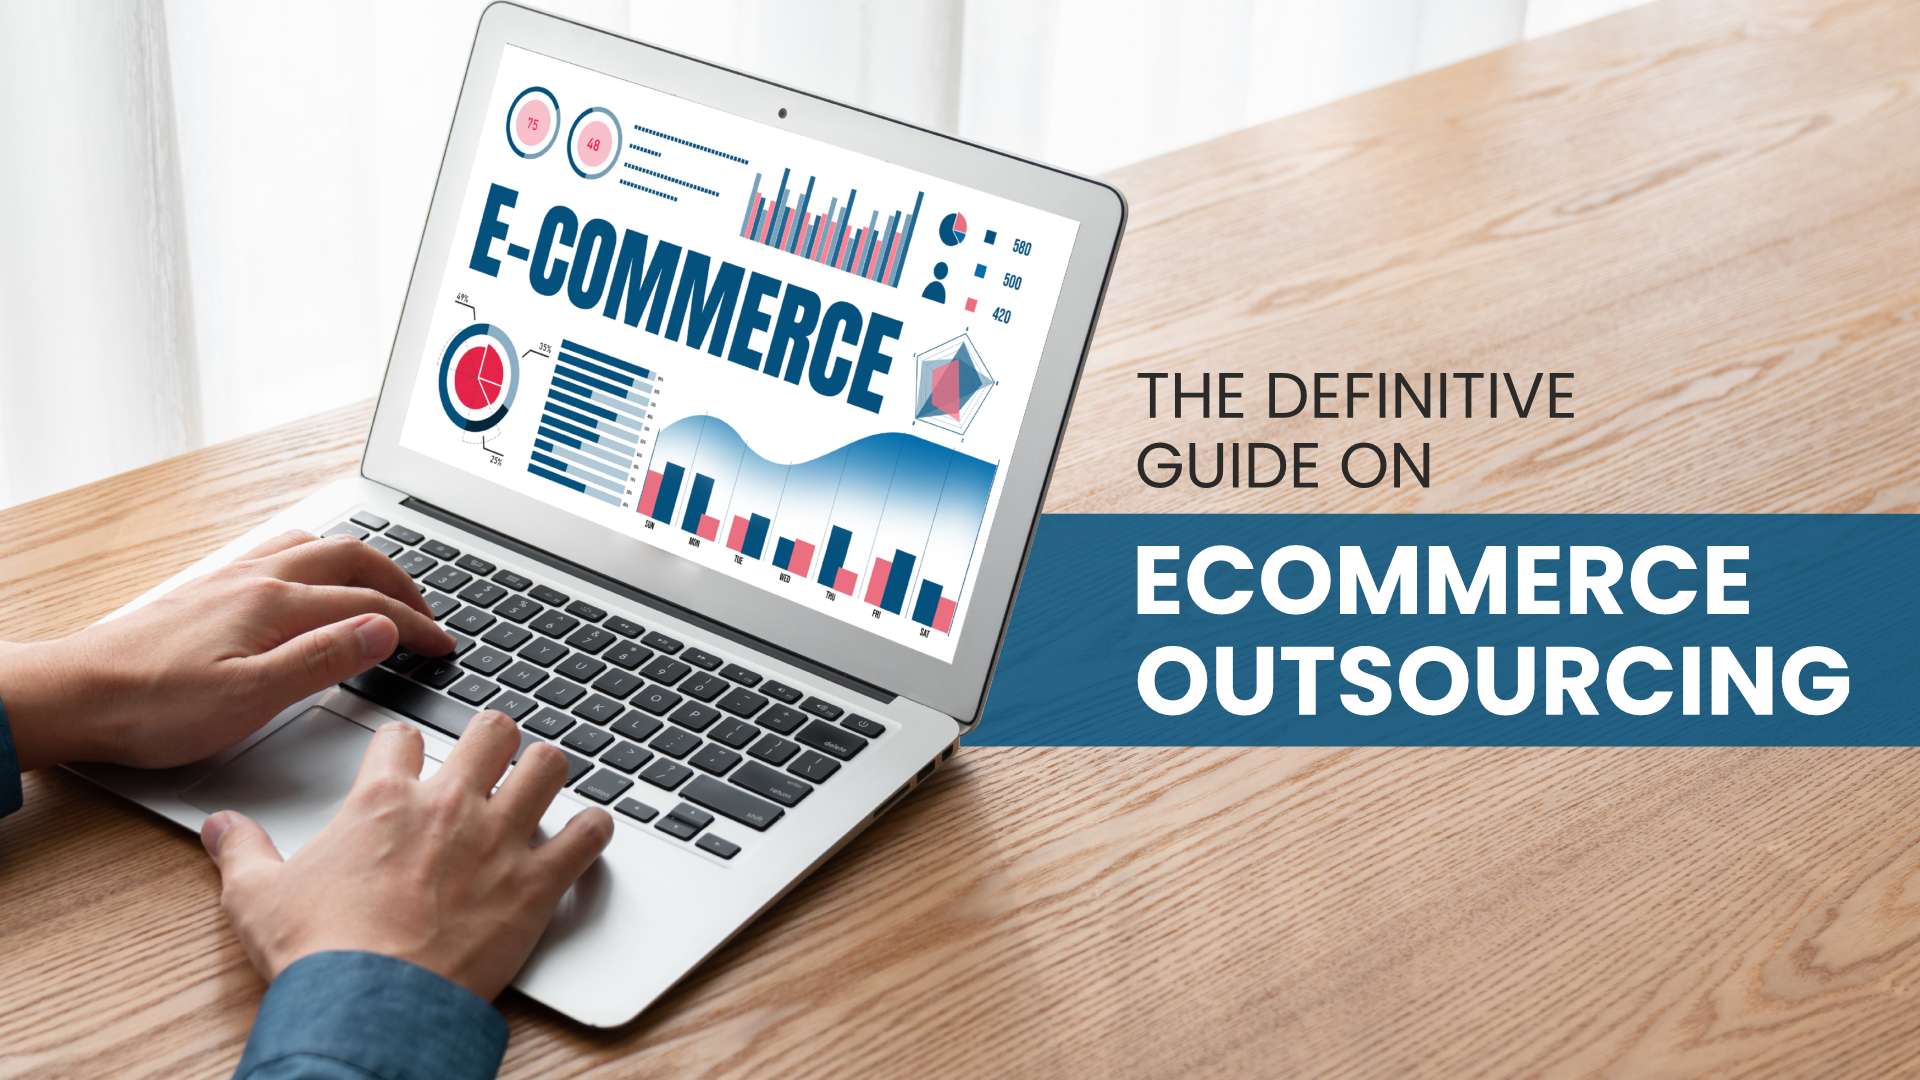 The Definitive Guide on eCommerce Outsourcing